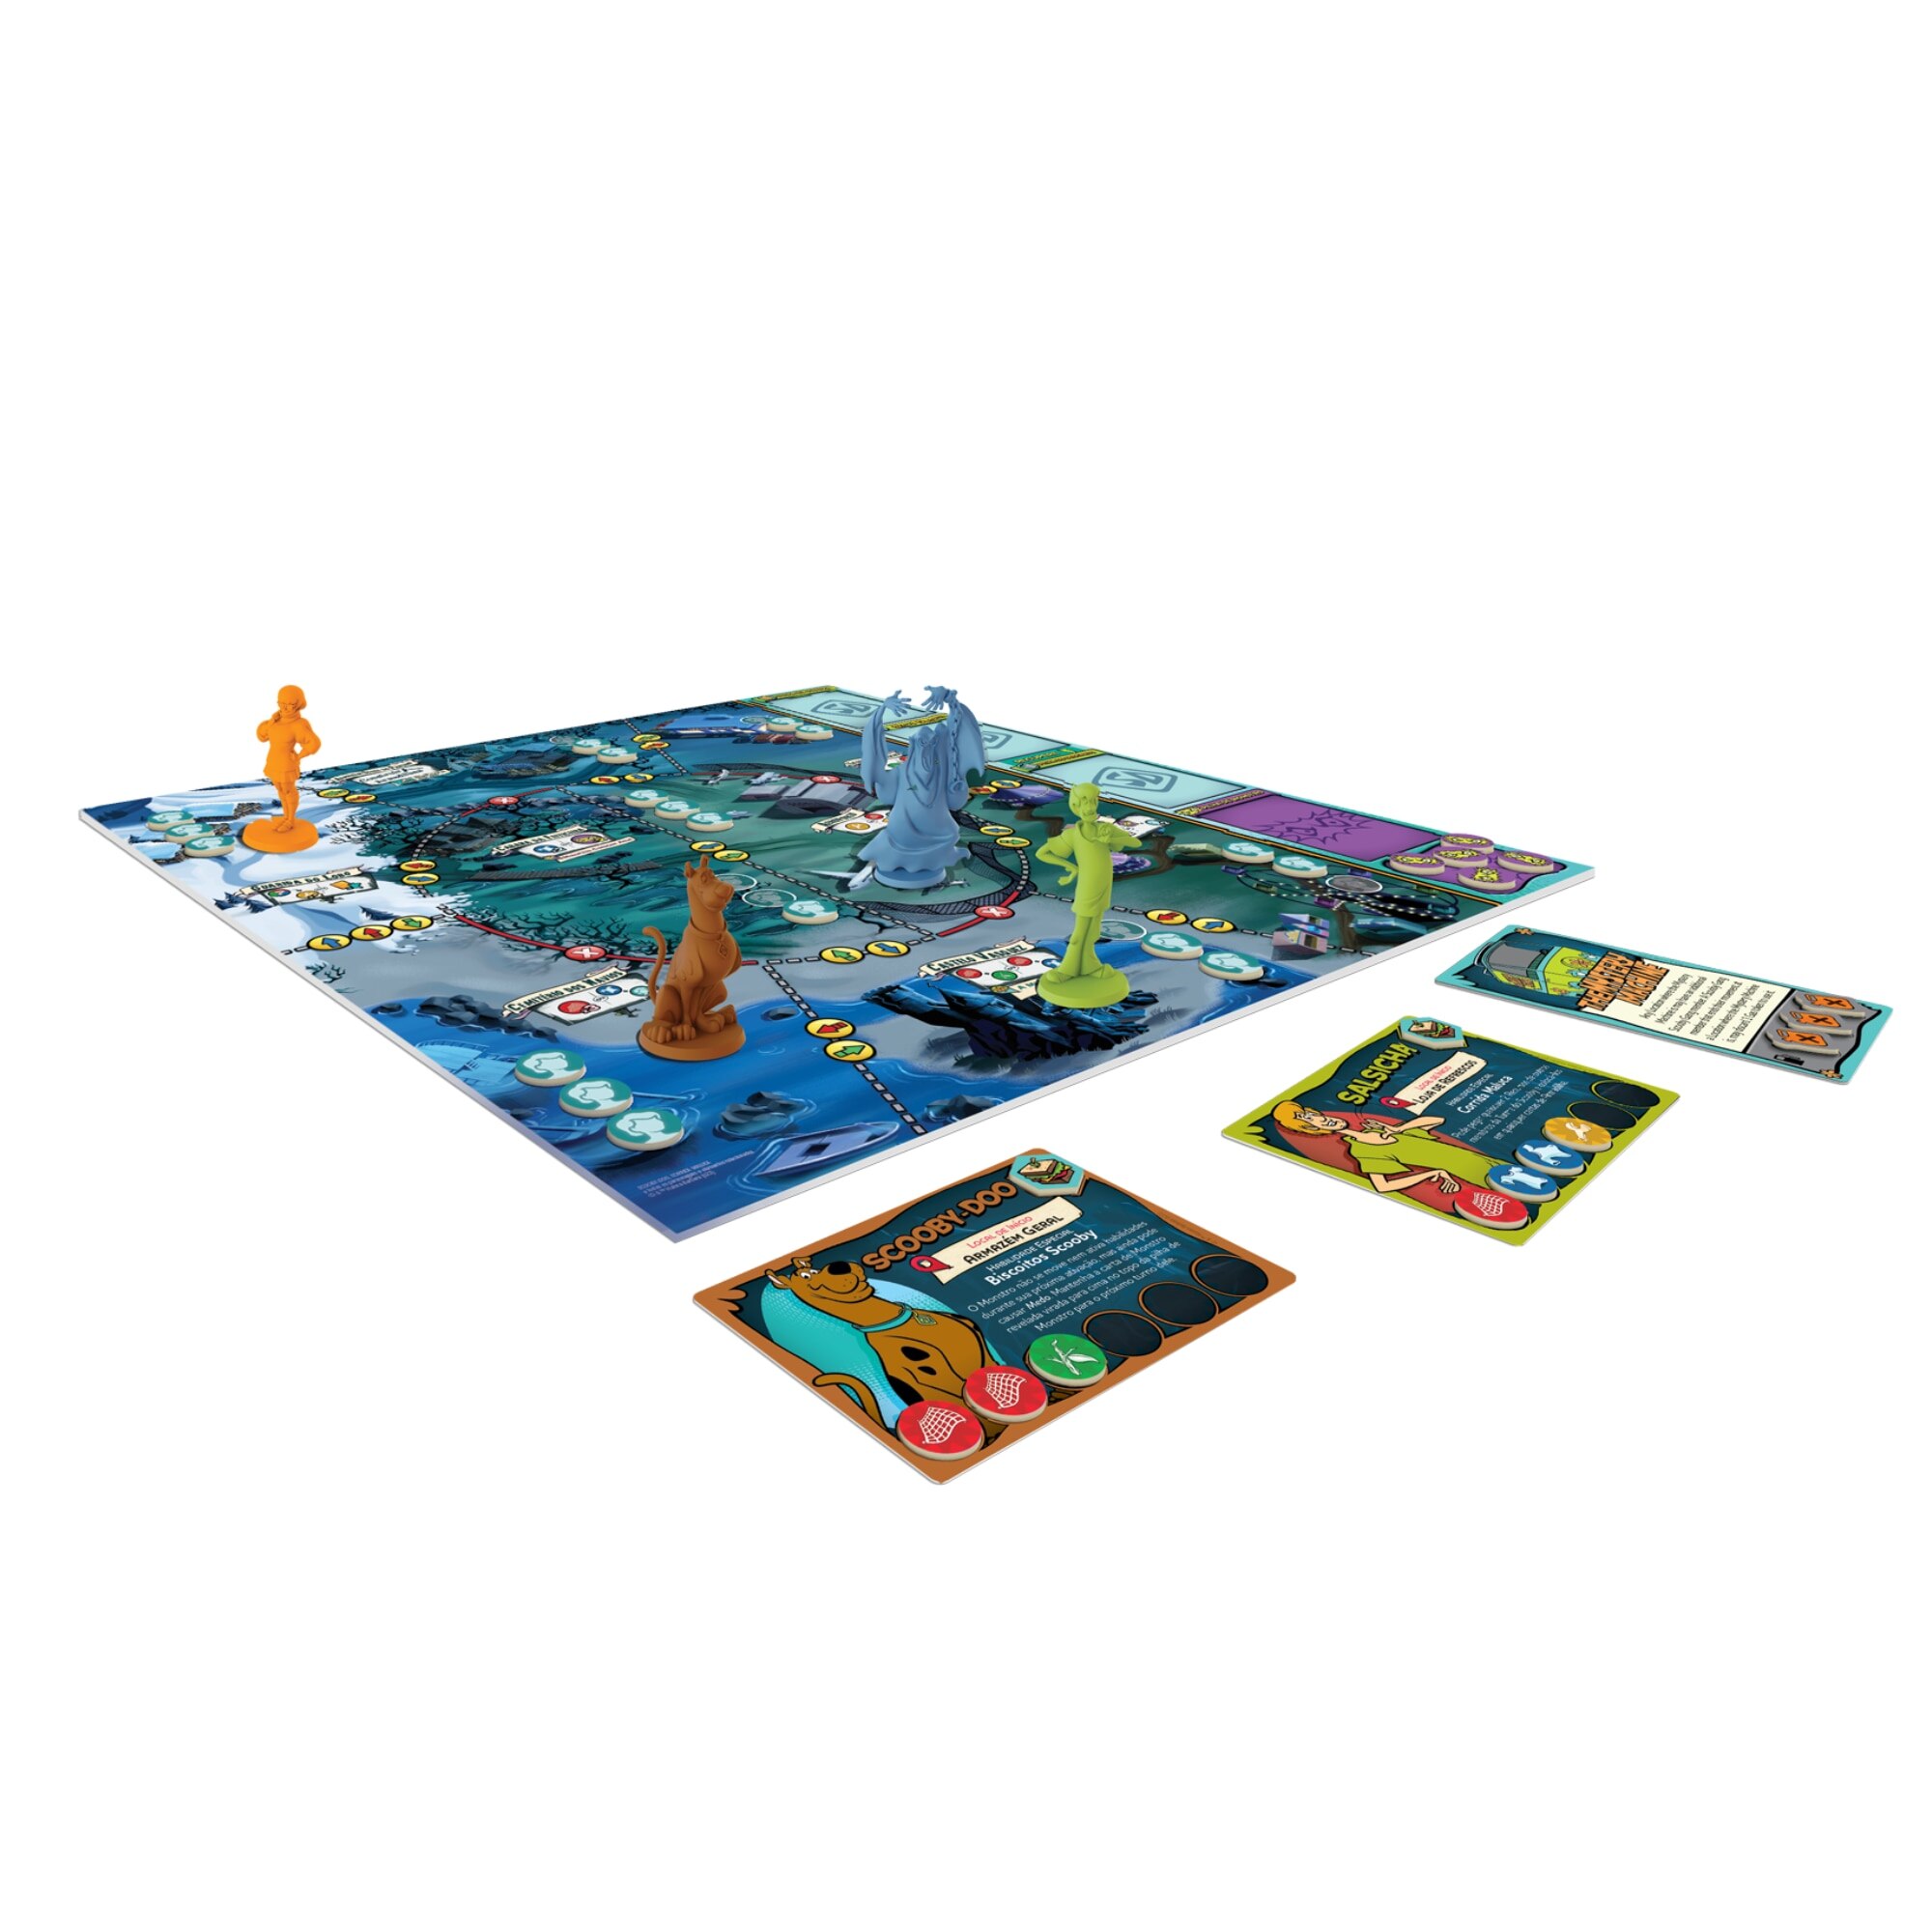 Jogo Scooby-Doo: The Board Game